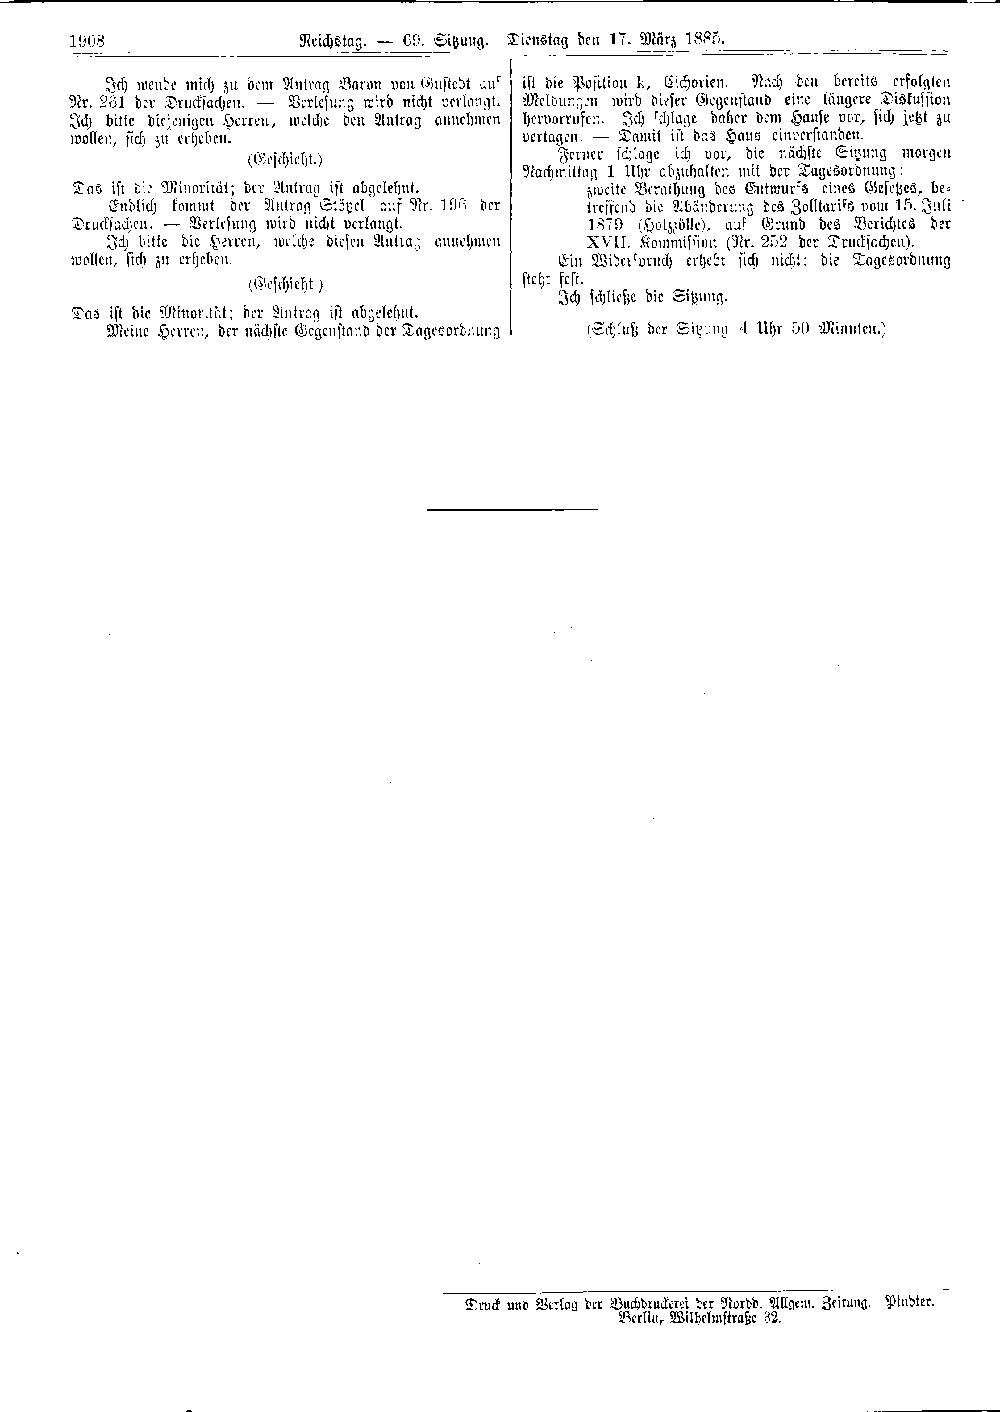 Scan of page 1908